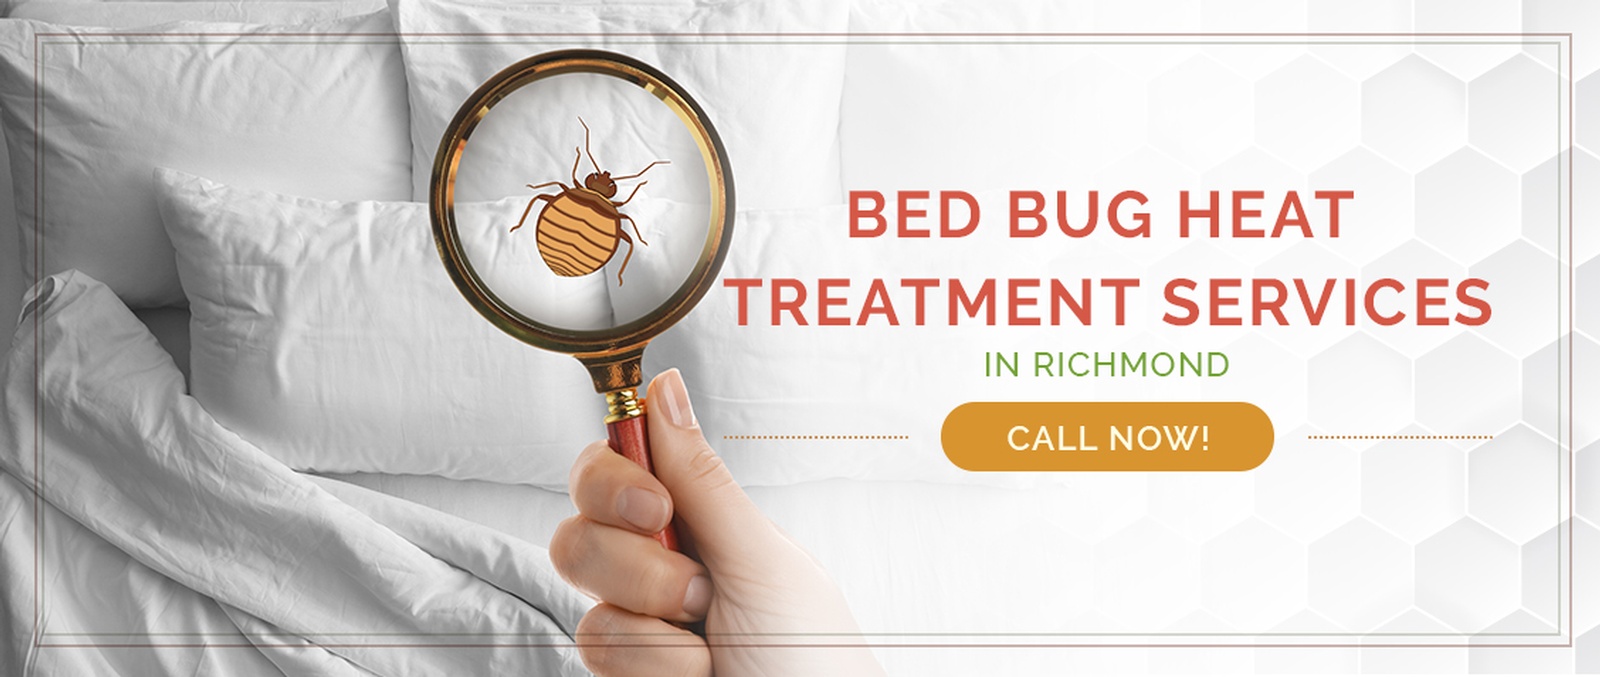 Richmond Bed Bug Treatment / Heater Rental Services by Houston Bed Bug Heaters